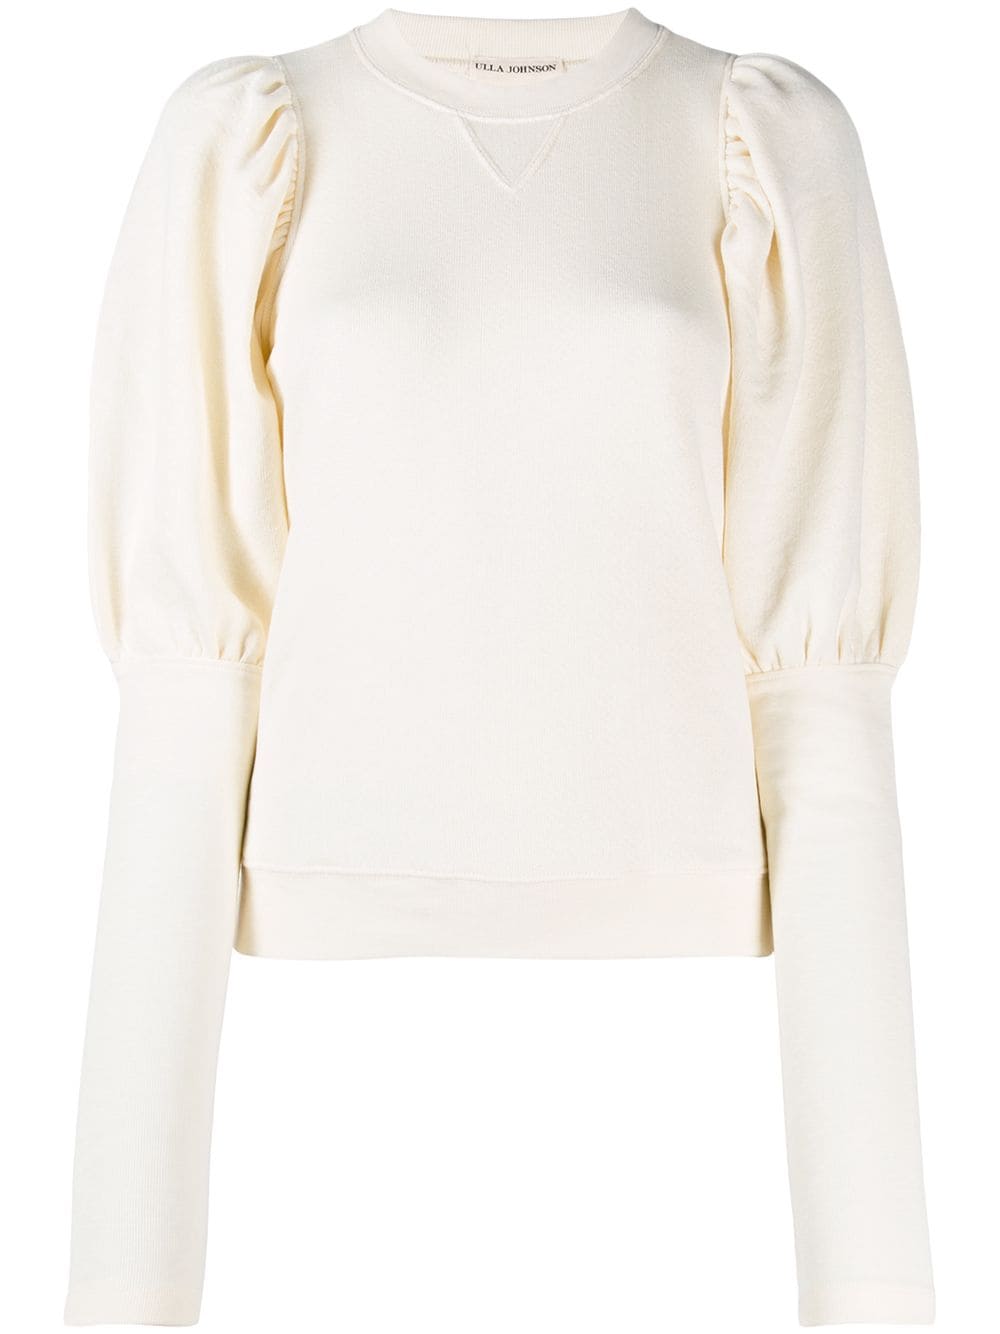 Ulla Johnson - Juliet Sleeve Jumper | ABOUT ICONS